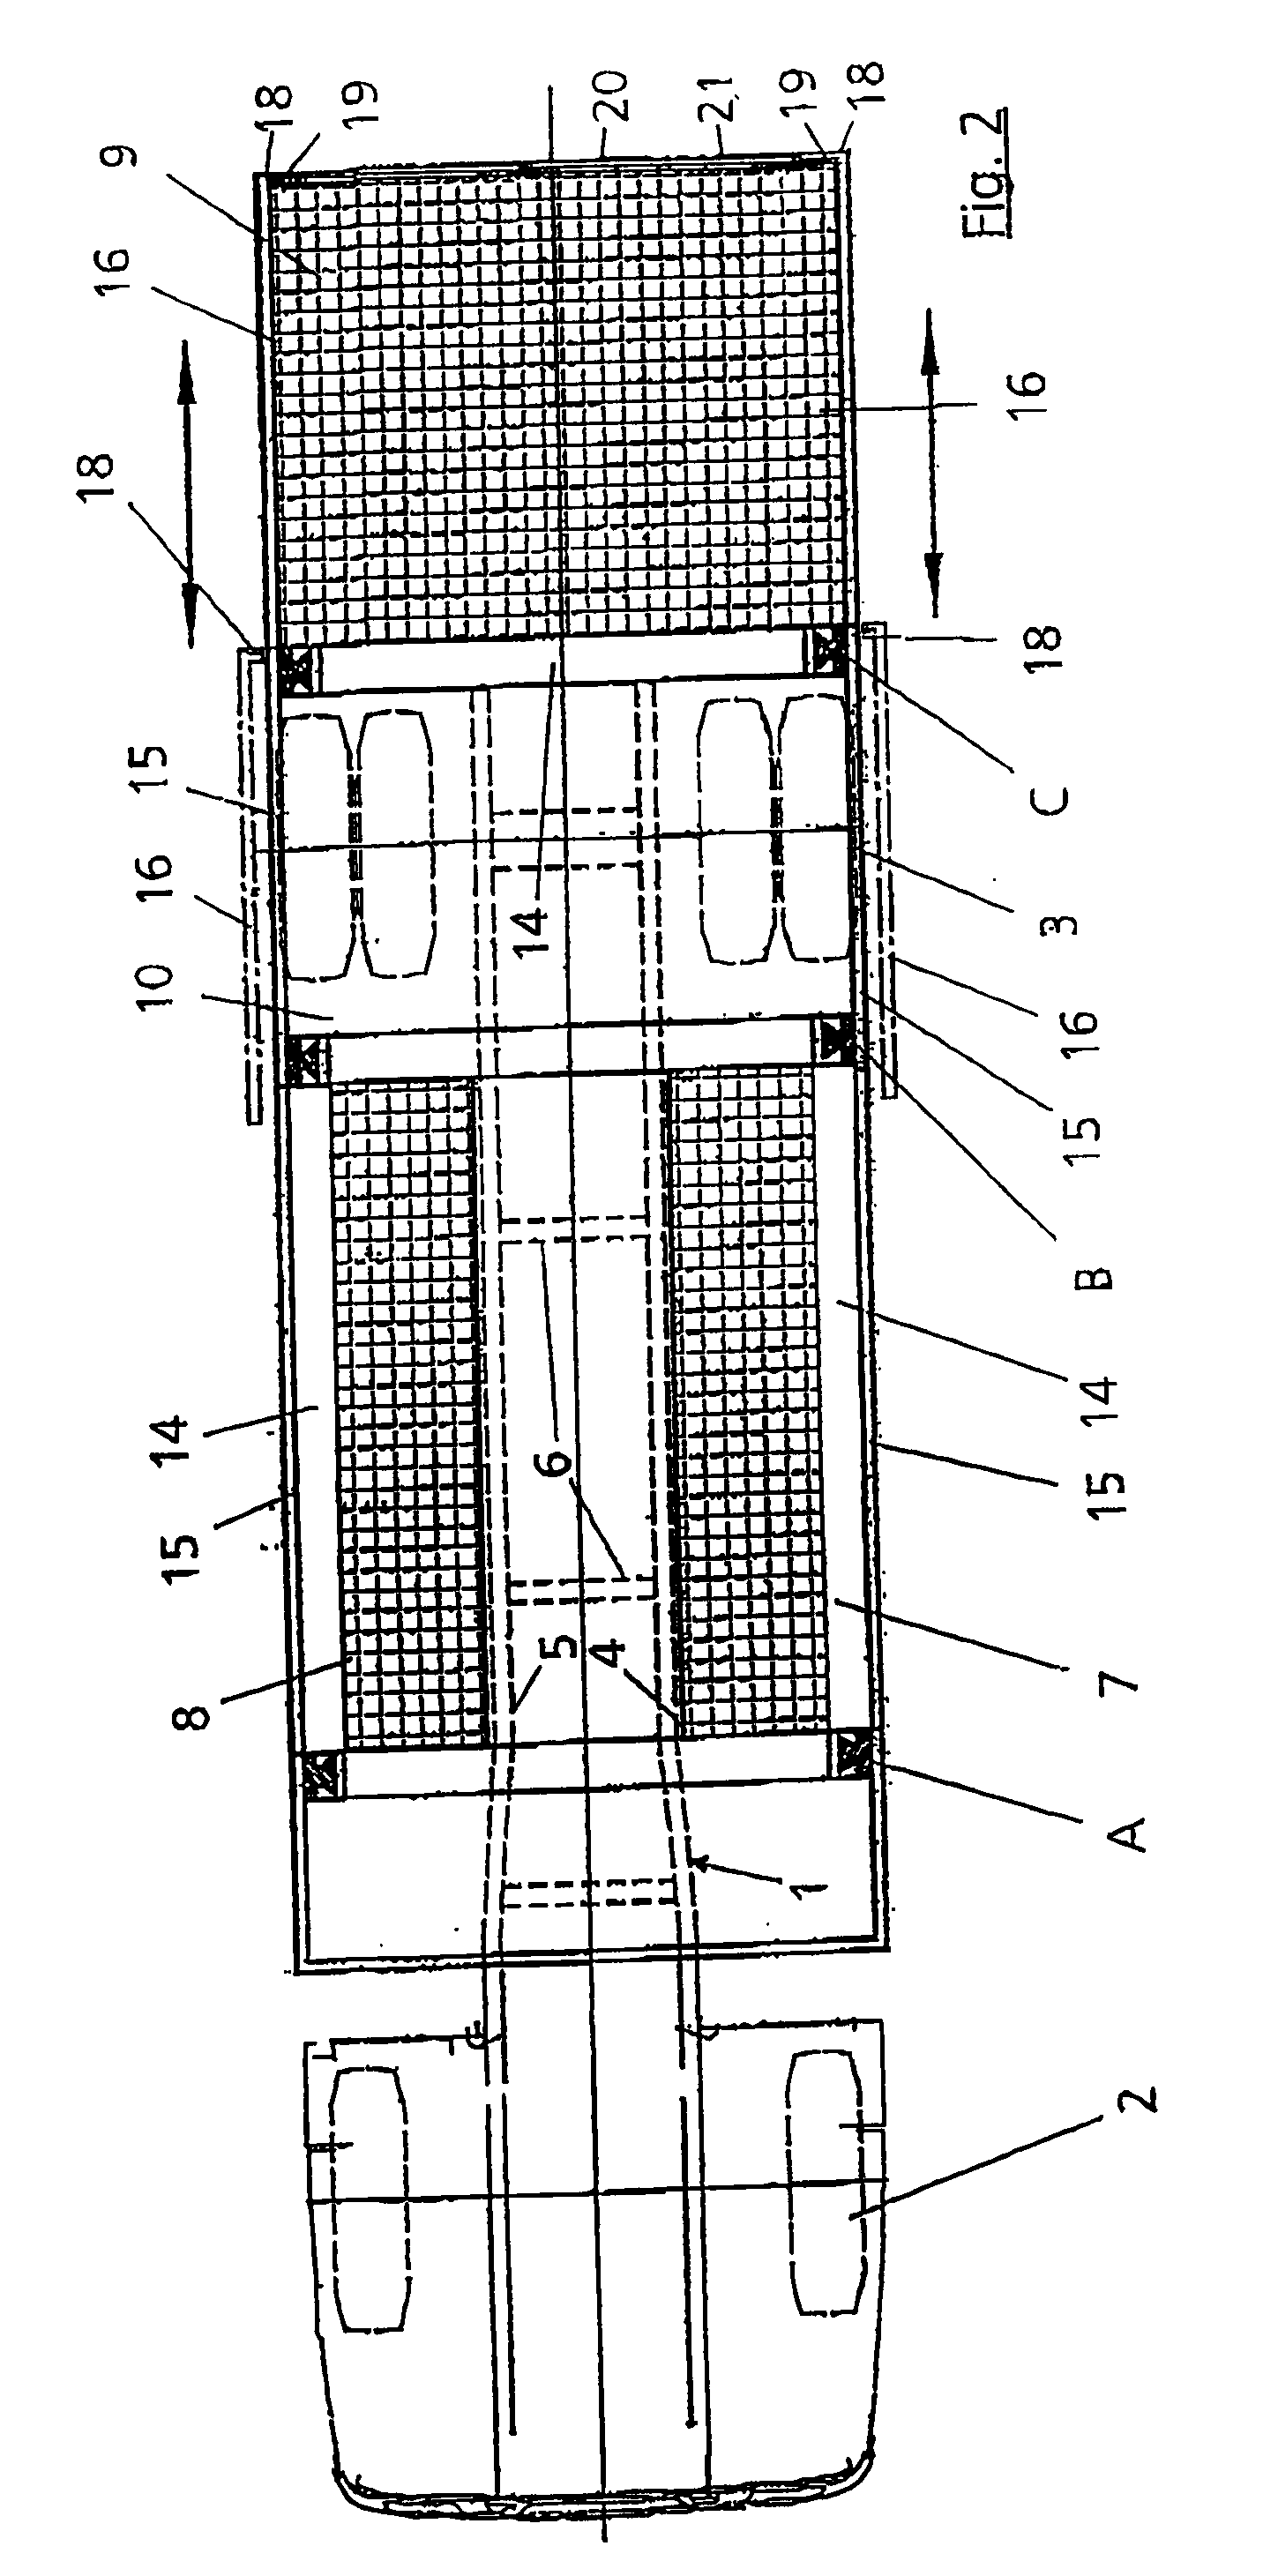 Vehicle with loading boxes or loading surfaces